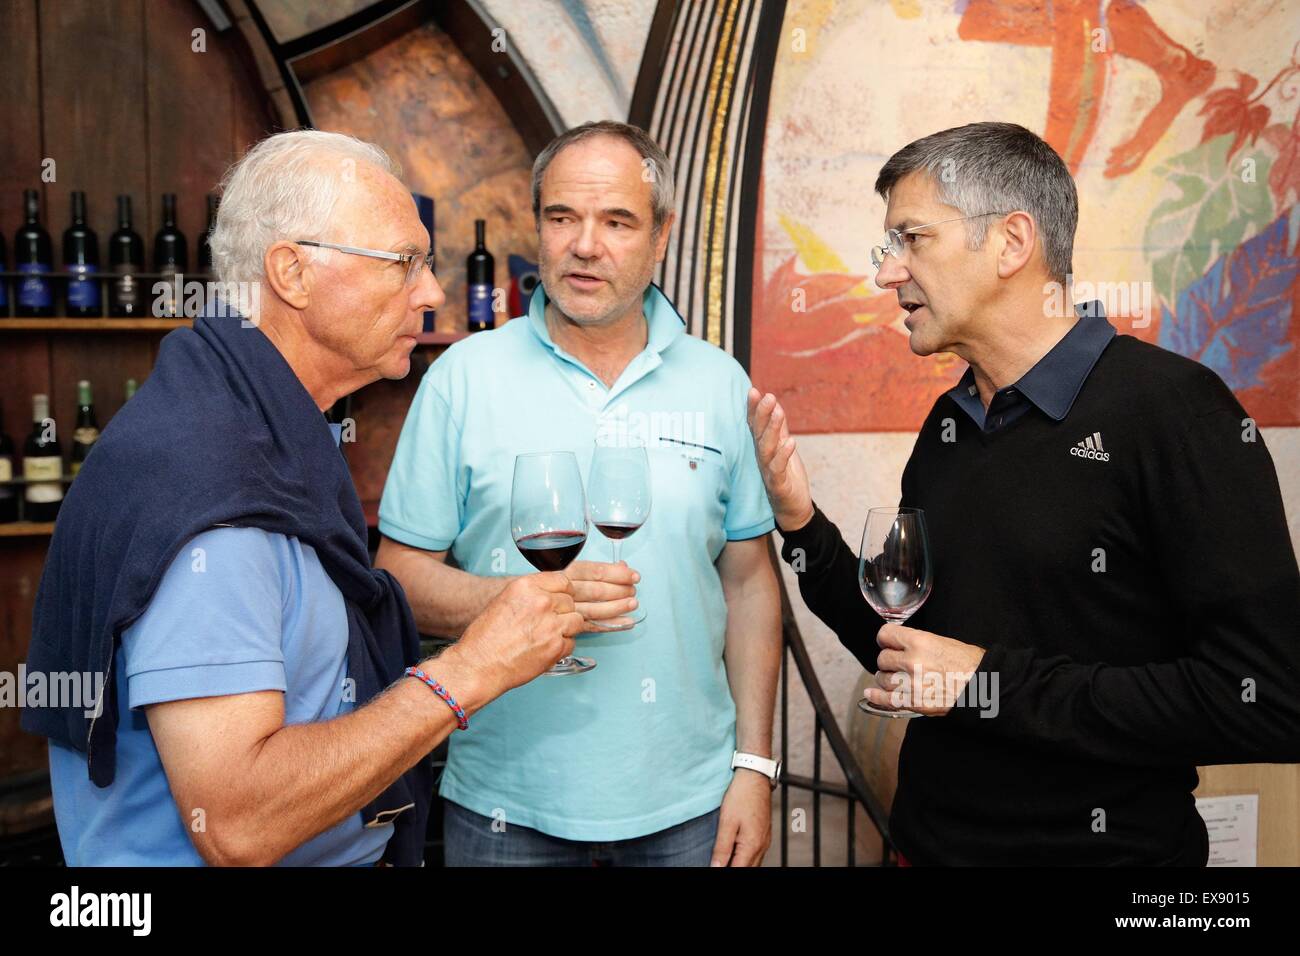 Bolzano, Italy. 7th July, 2015. HANDOUT - A handout picture made available on 08 July 2015 of Franz Beckenbauer (L) and Herbert Hainer (R) attend a wine tasting in the morning of day 2 of the FIFA World Champions of 1990 meeting at Hotel Seeleiten (Kaltern - Caldaro) on July 7, 2015 in Bolzano, Italy. Germany defeated Argentina 1-0 in the 1990 FIFA World Cup final at the Olympic stadium in Rome, Italy, on 08 July 1990. Photo: JOHANNES SIMON/dpa (ATTENTION EDITORS: FOR EDITORIAL USE ONLY IN CONNECTION WITH MANDATORY CREDIT: Photo: Johannes Simon/Bongarts/Getty Images/dpa)/dpa/Alamy Live News Stock Photo